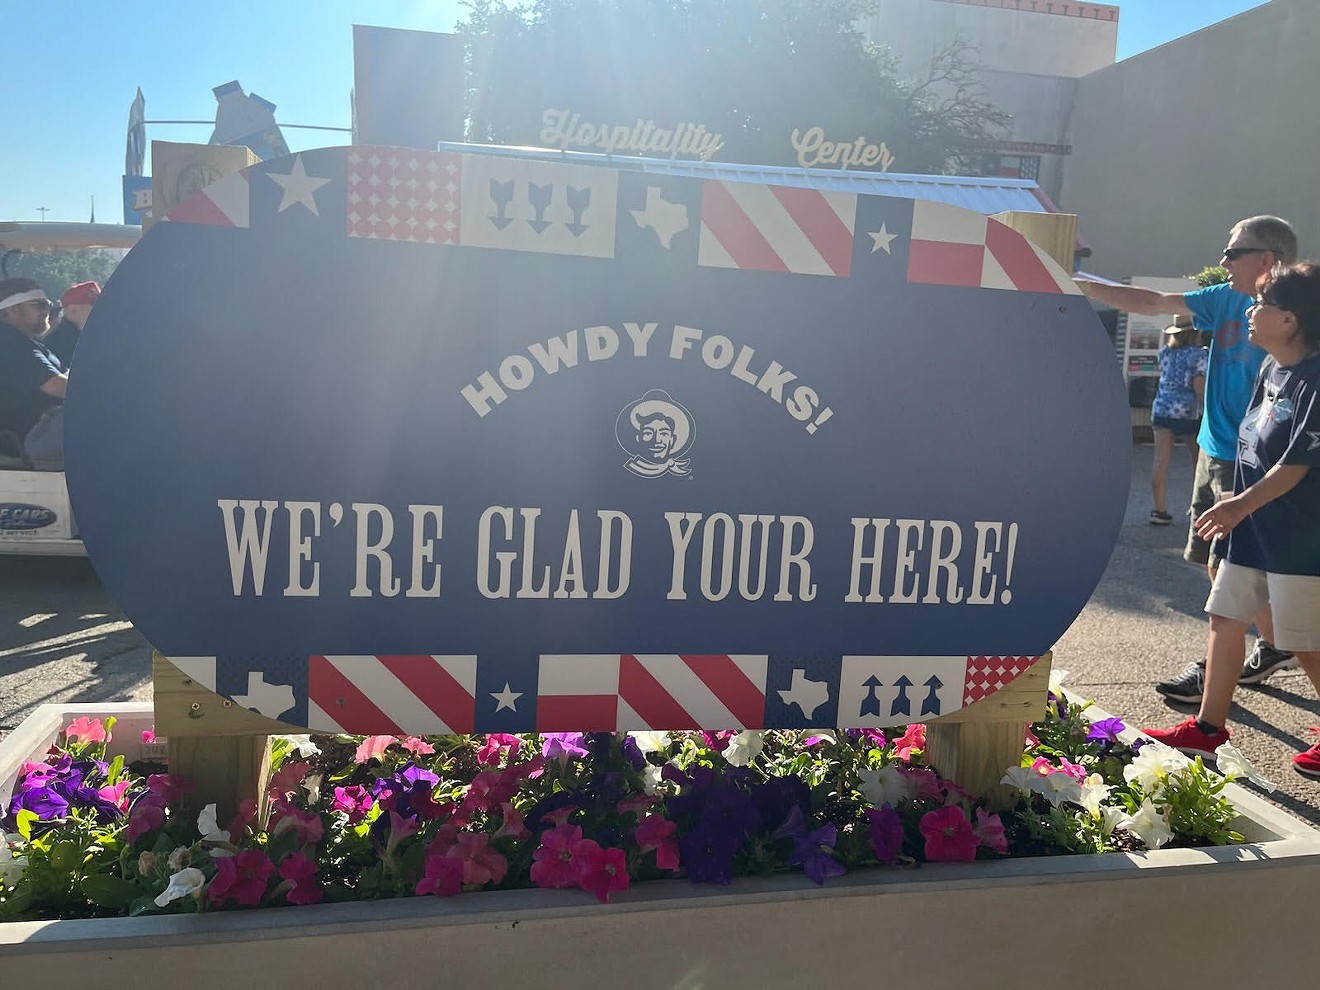 This sign welcoming guests to another season of the State Fair of Texas has a teensy typo in it. Can you spot it?